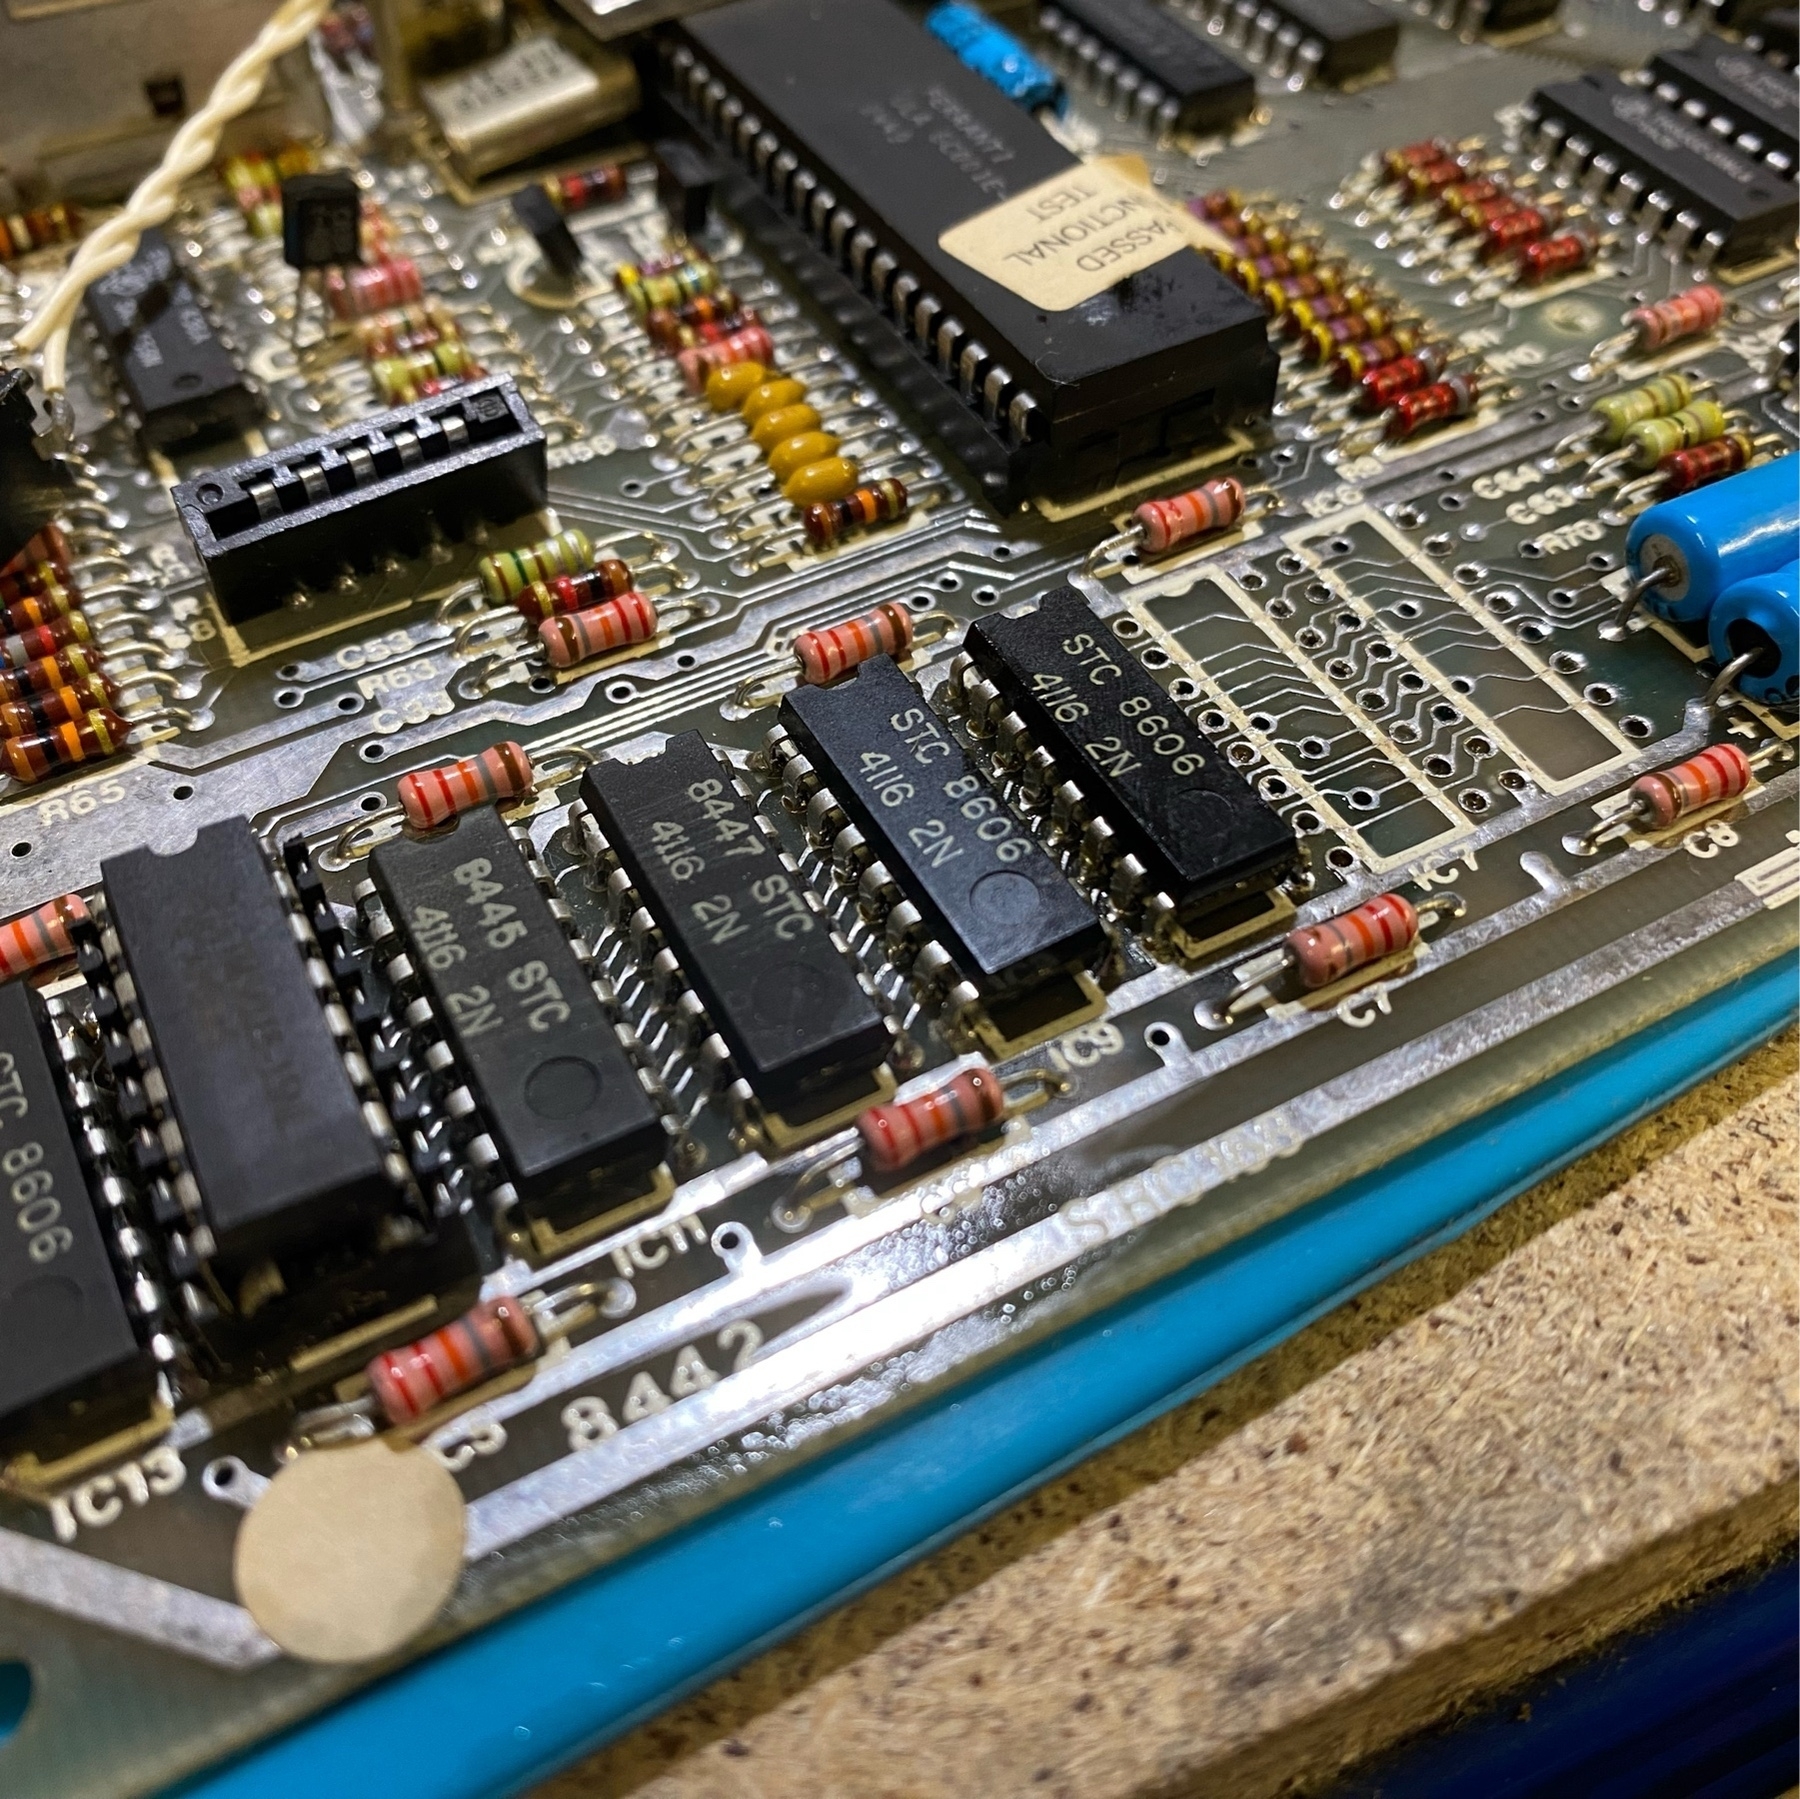 a ZX Spectrum motherboard with two microchips removed